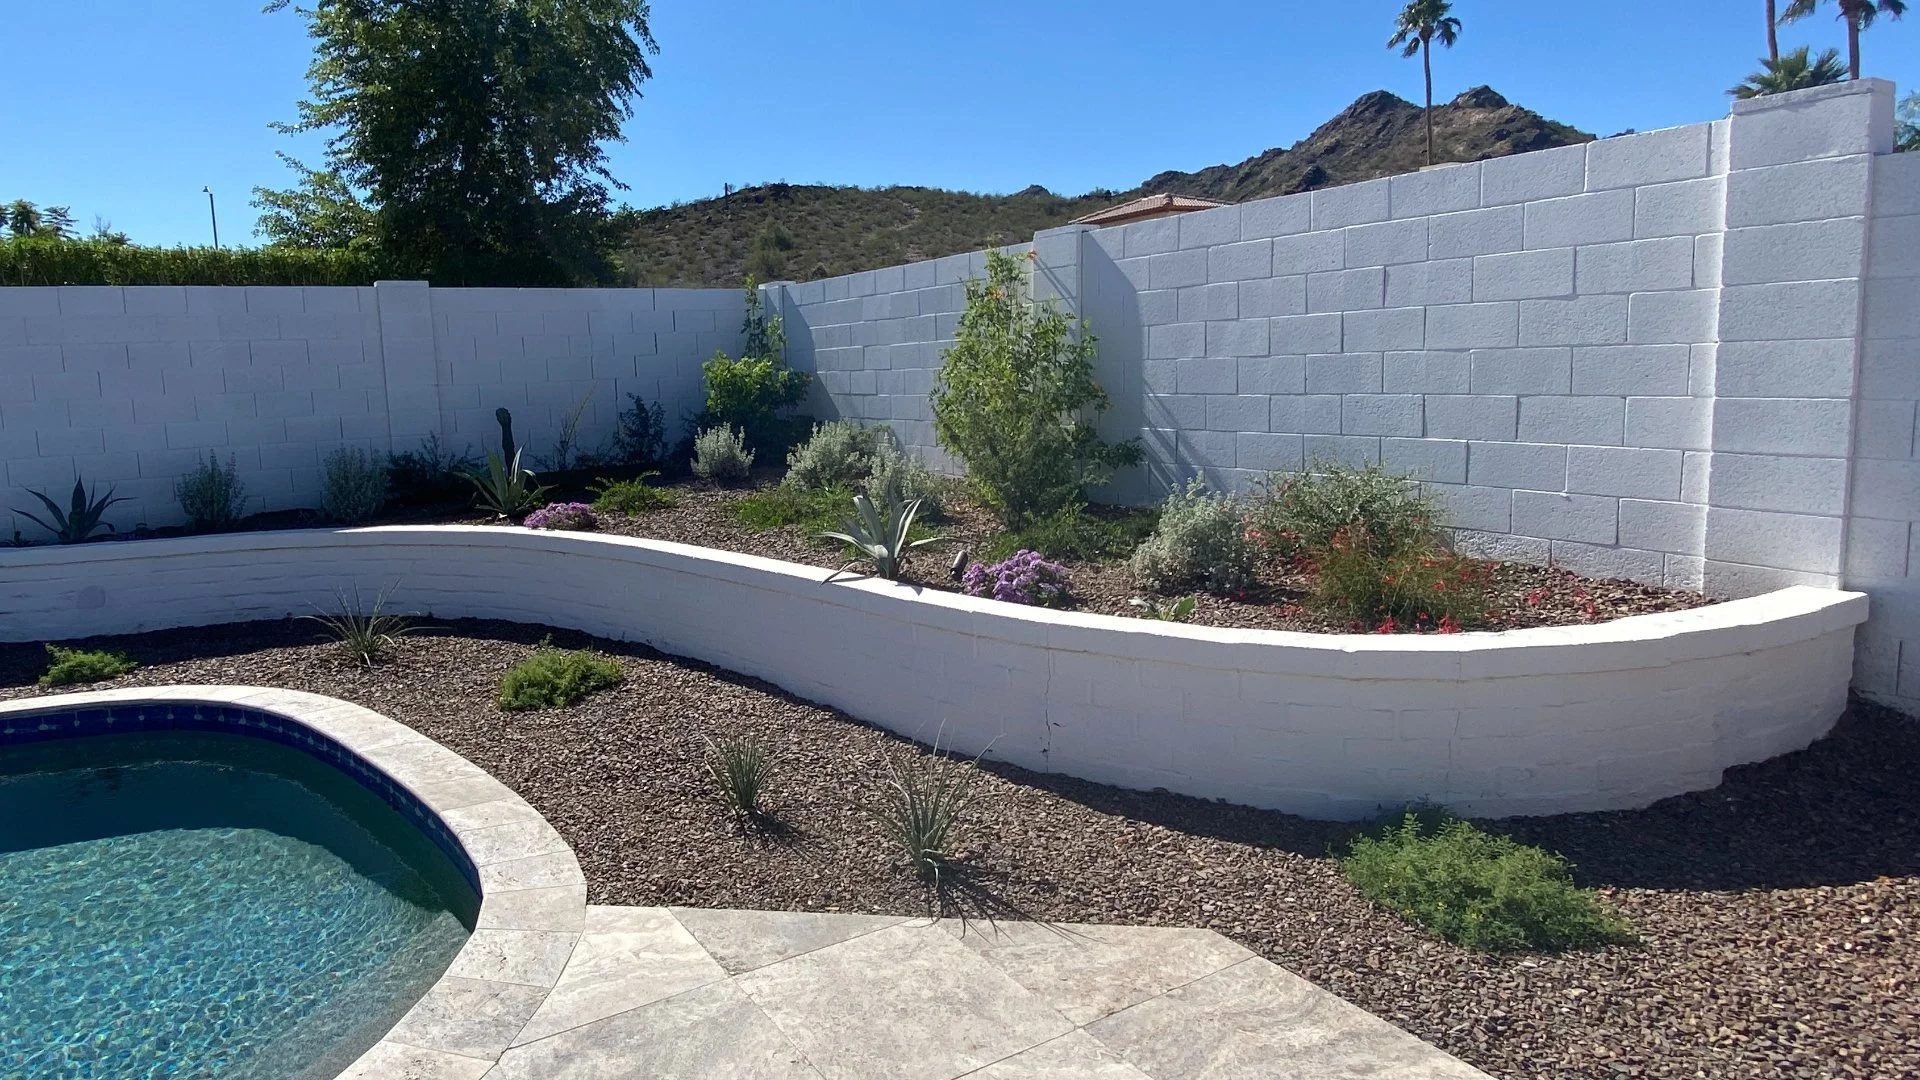 How Are Retaining Walls Beneficial for Sloped Yards?